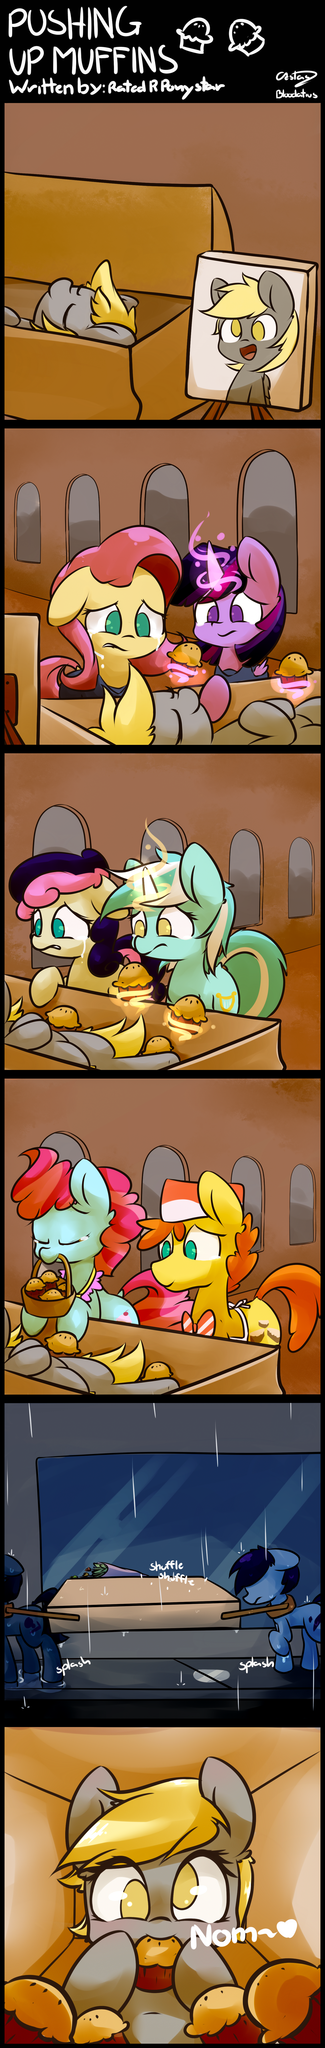 [Obrázek: pushing_up_muffins_by_rated_r_ponystar-davkex7.png]